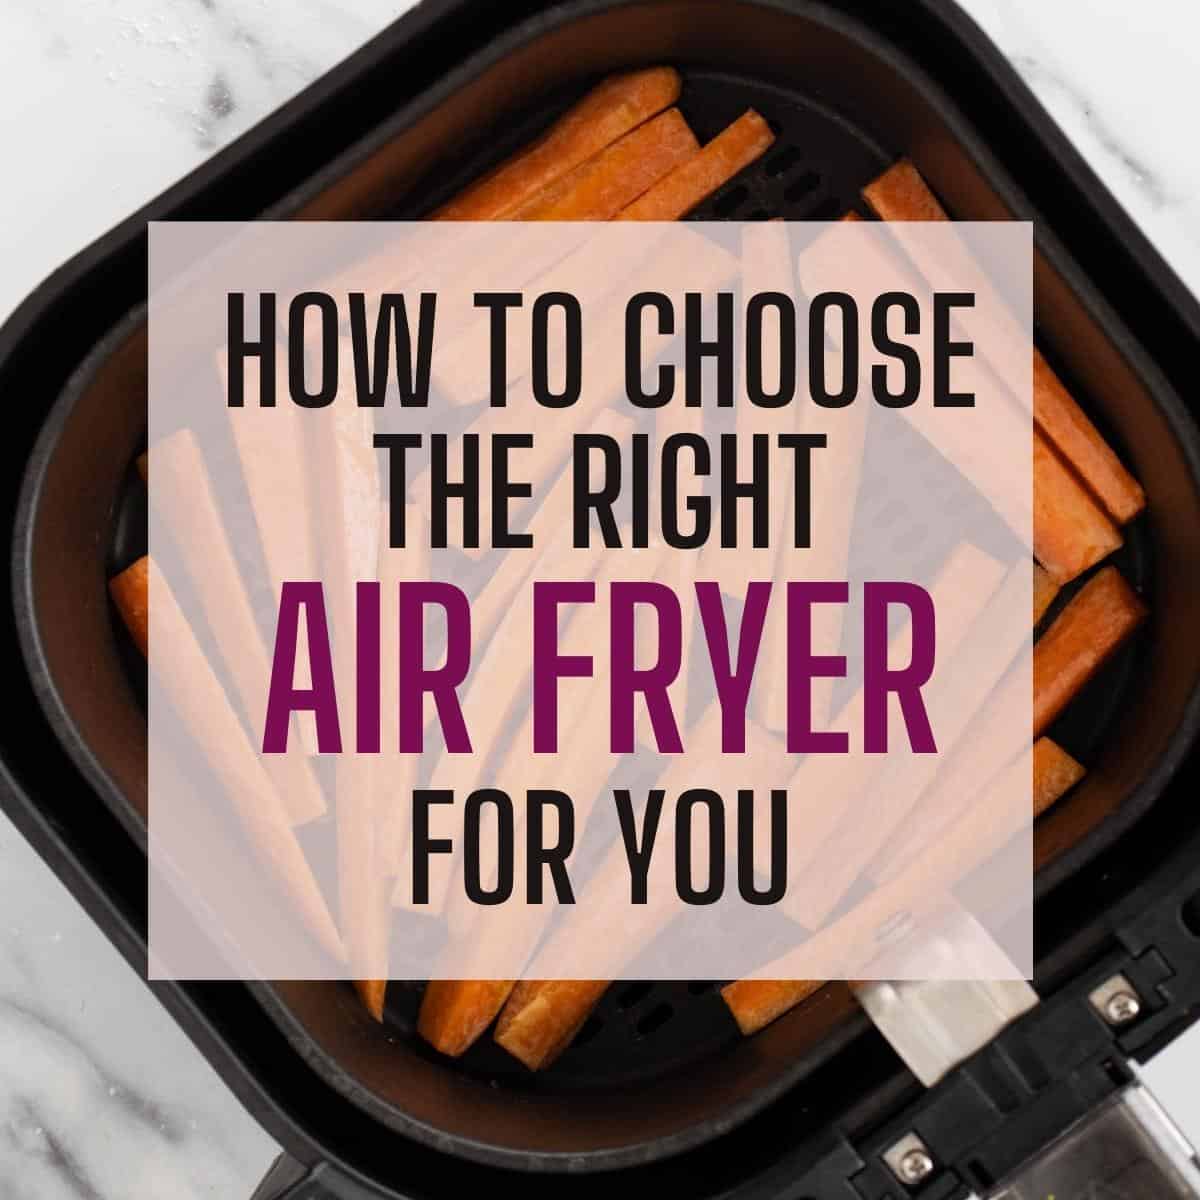 Carrot fries in air fryer with text overlay.